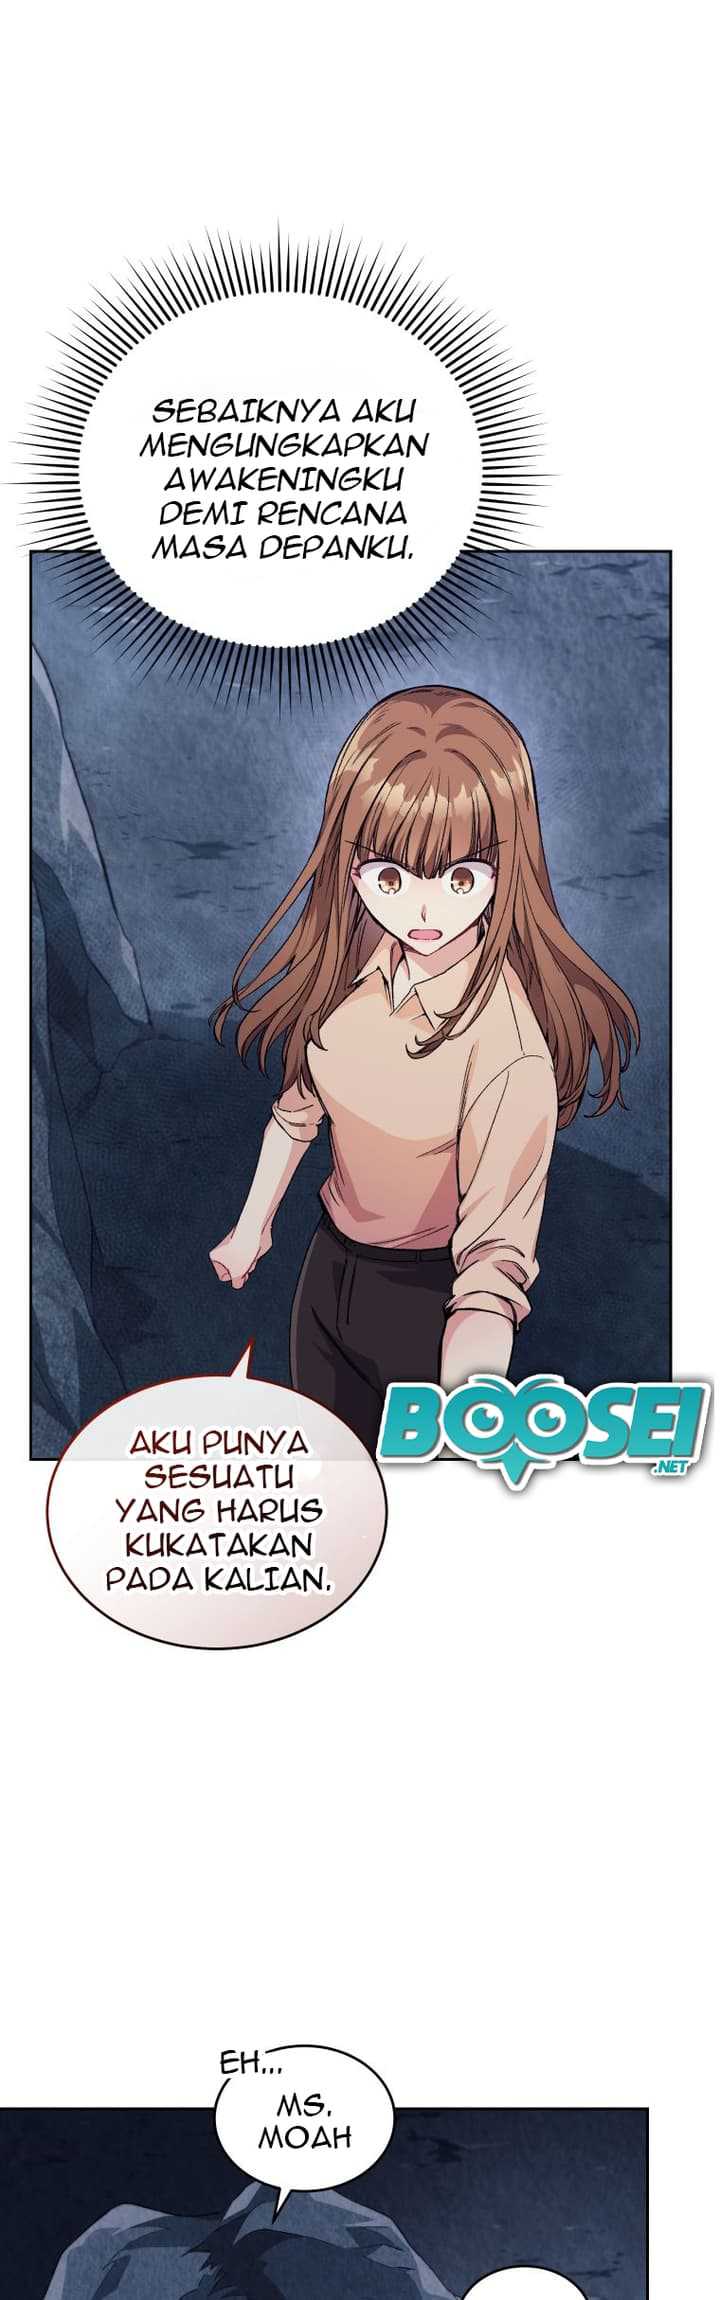 I Stole the Number One Ranker’s Soul Chapter 06